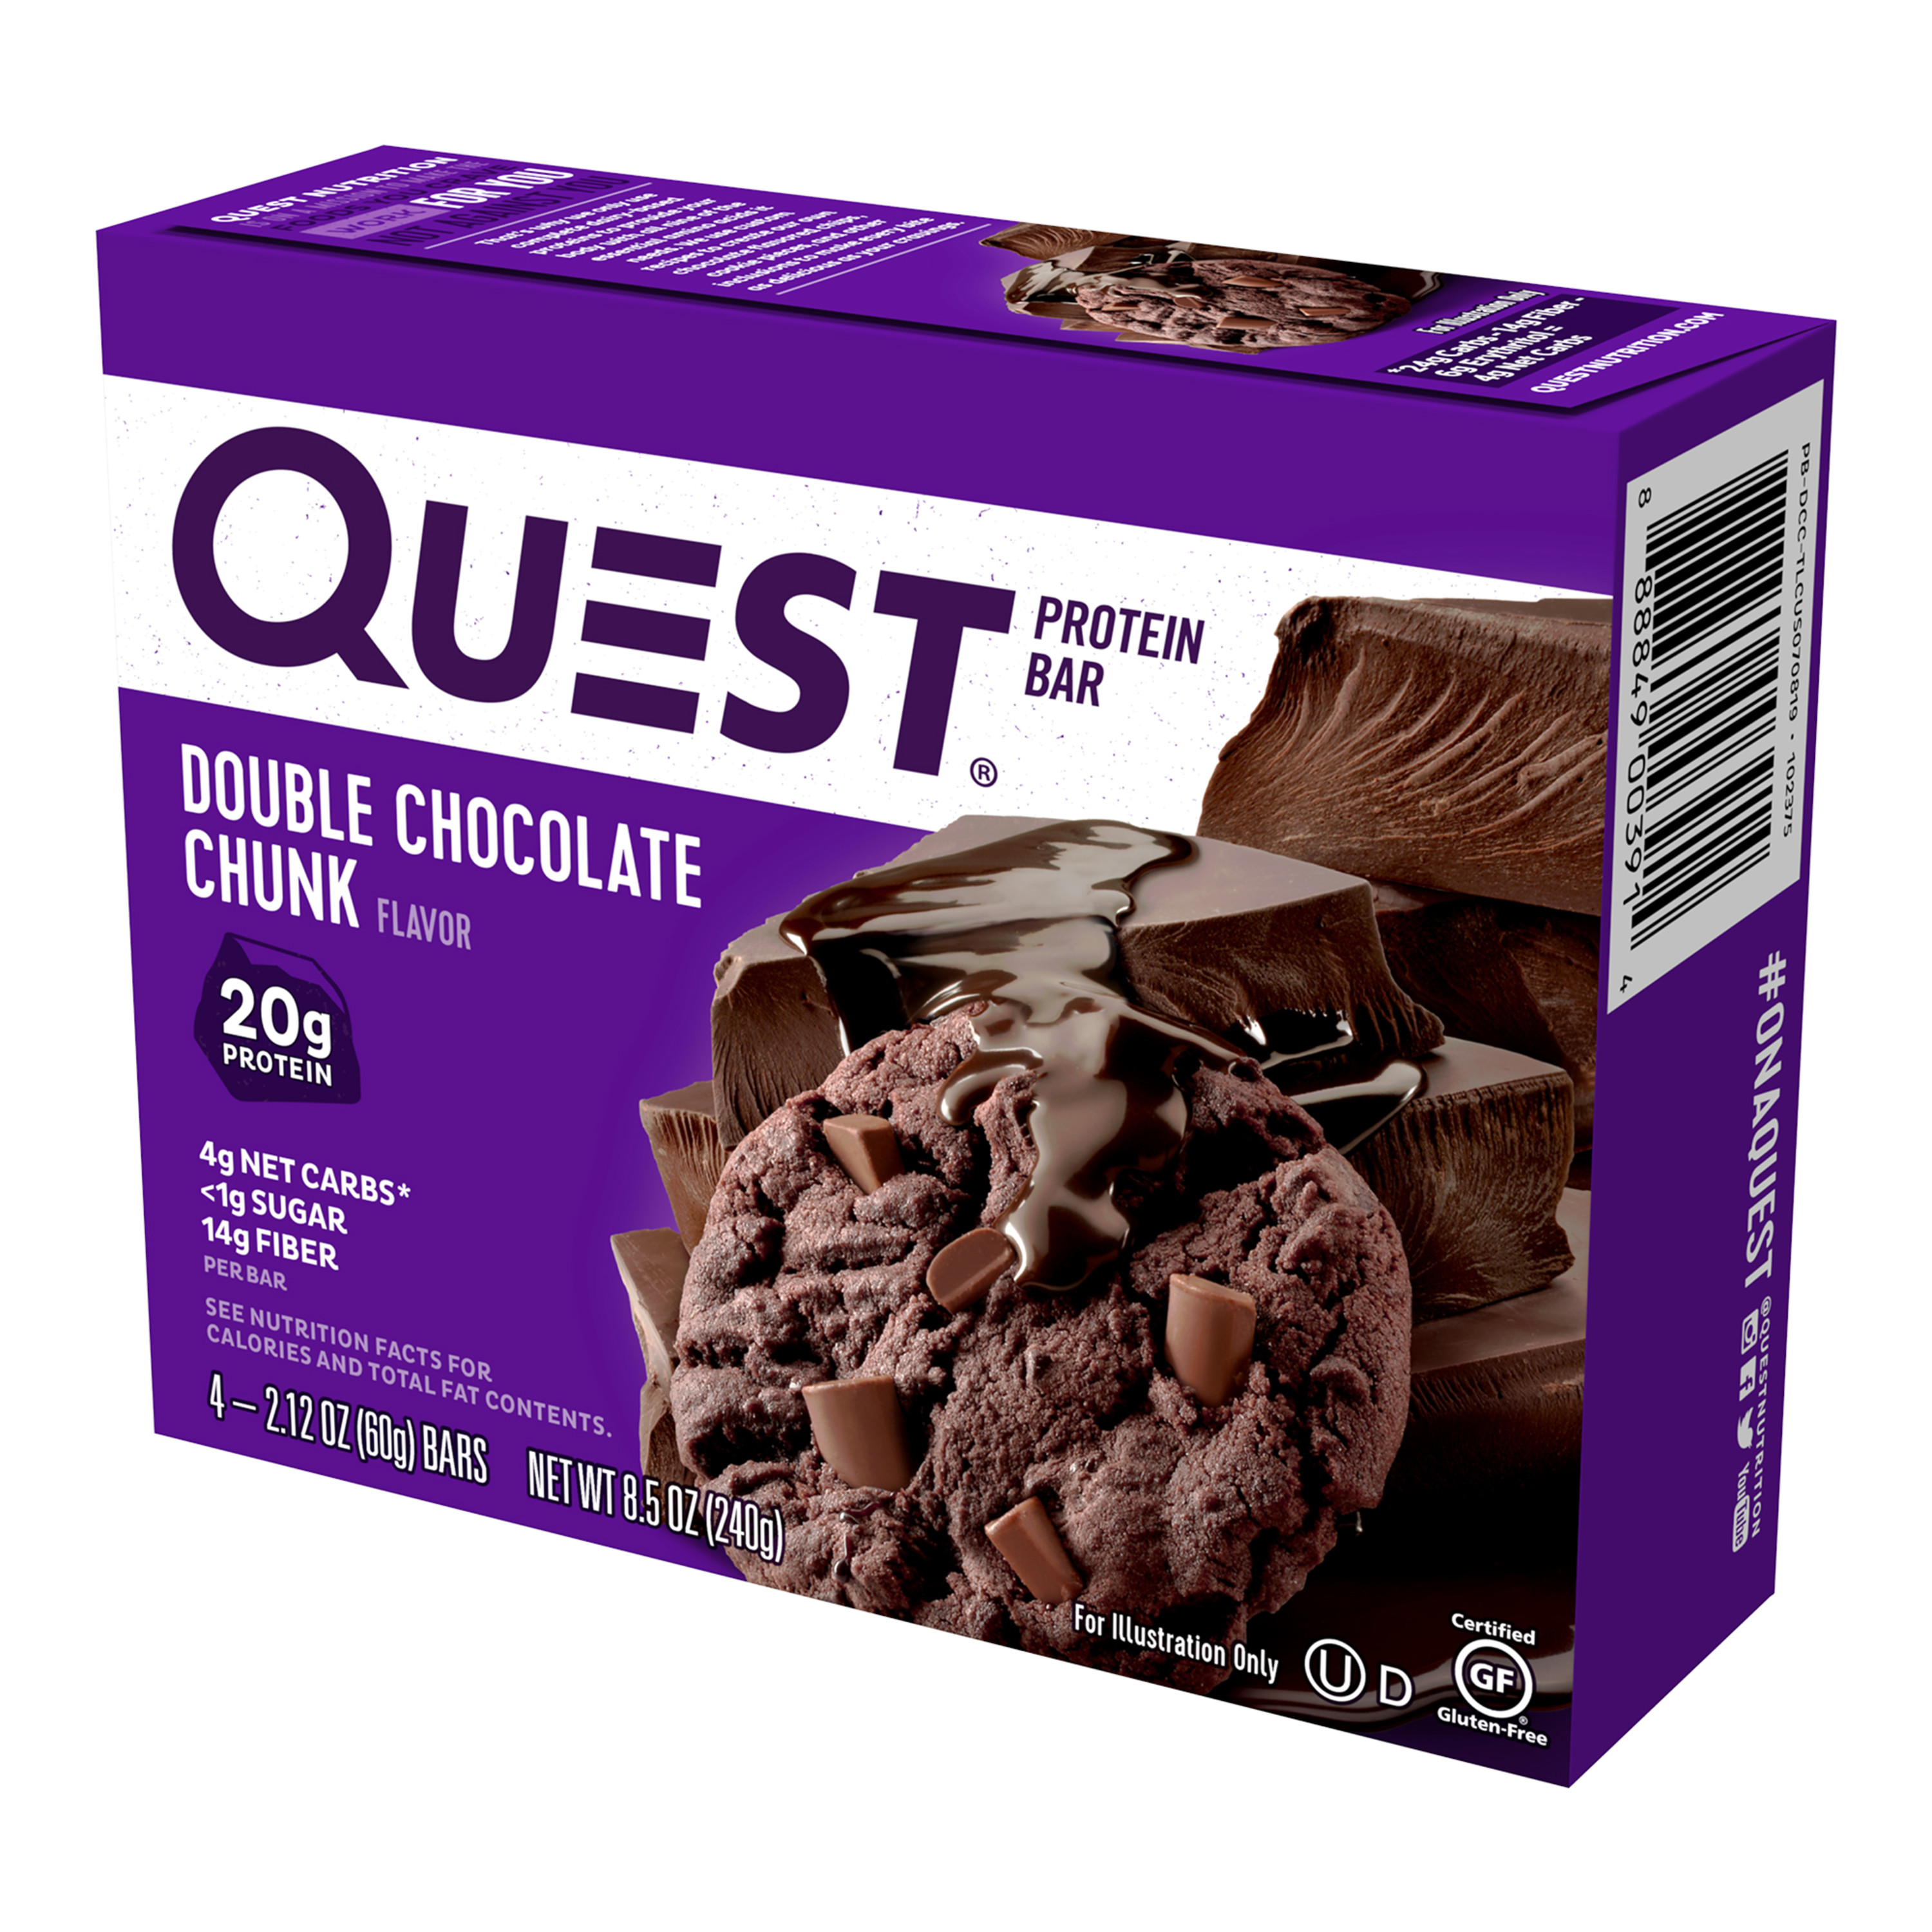 Quest Protein Bar, Double Chocolate Chunk, 20g Protein, 4 Ct - image 1 of 9